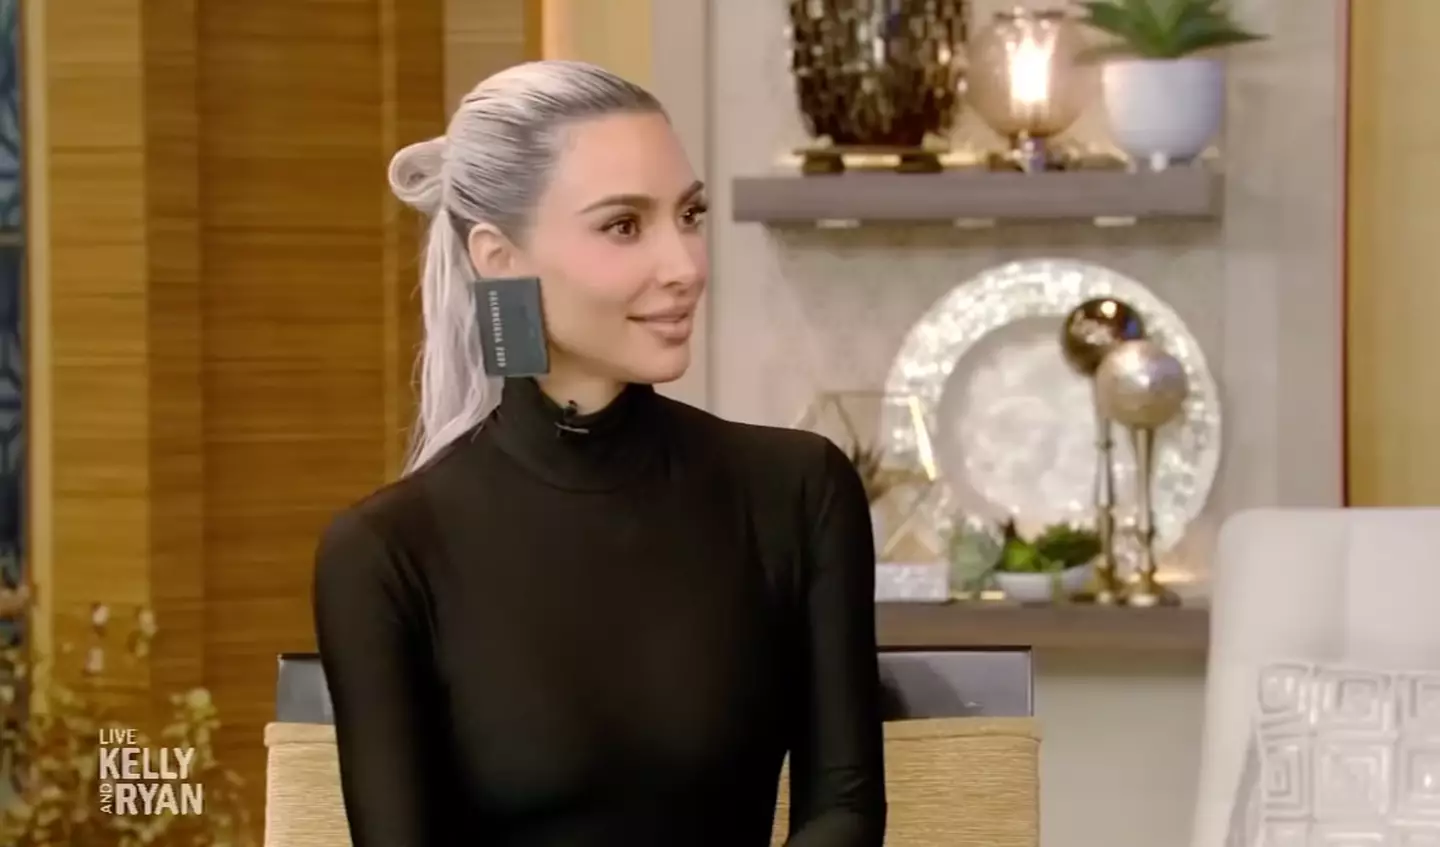 Kim discussed going grey during a recent interview.